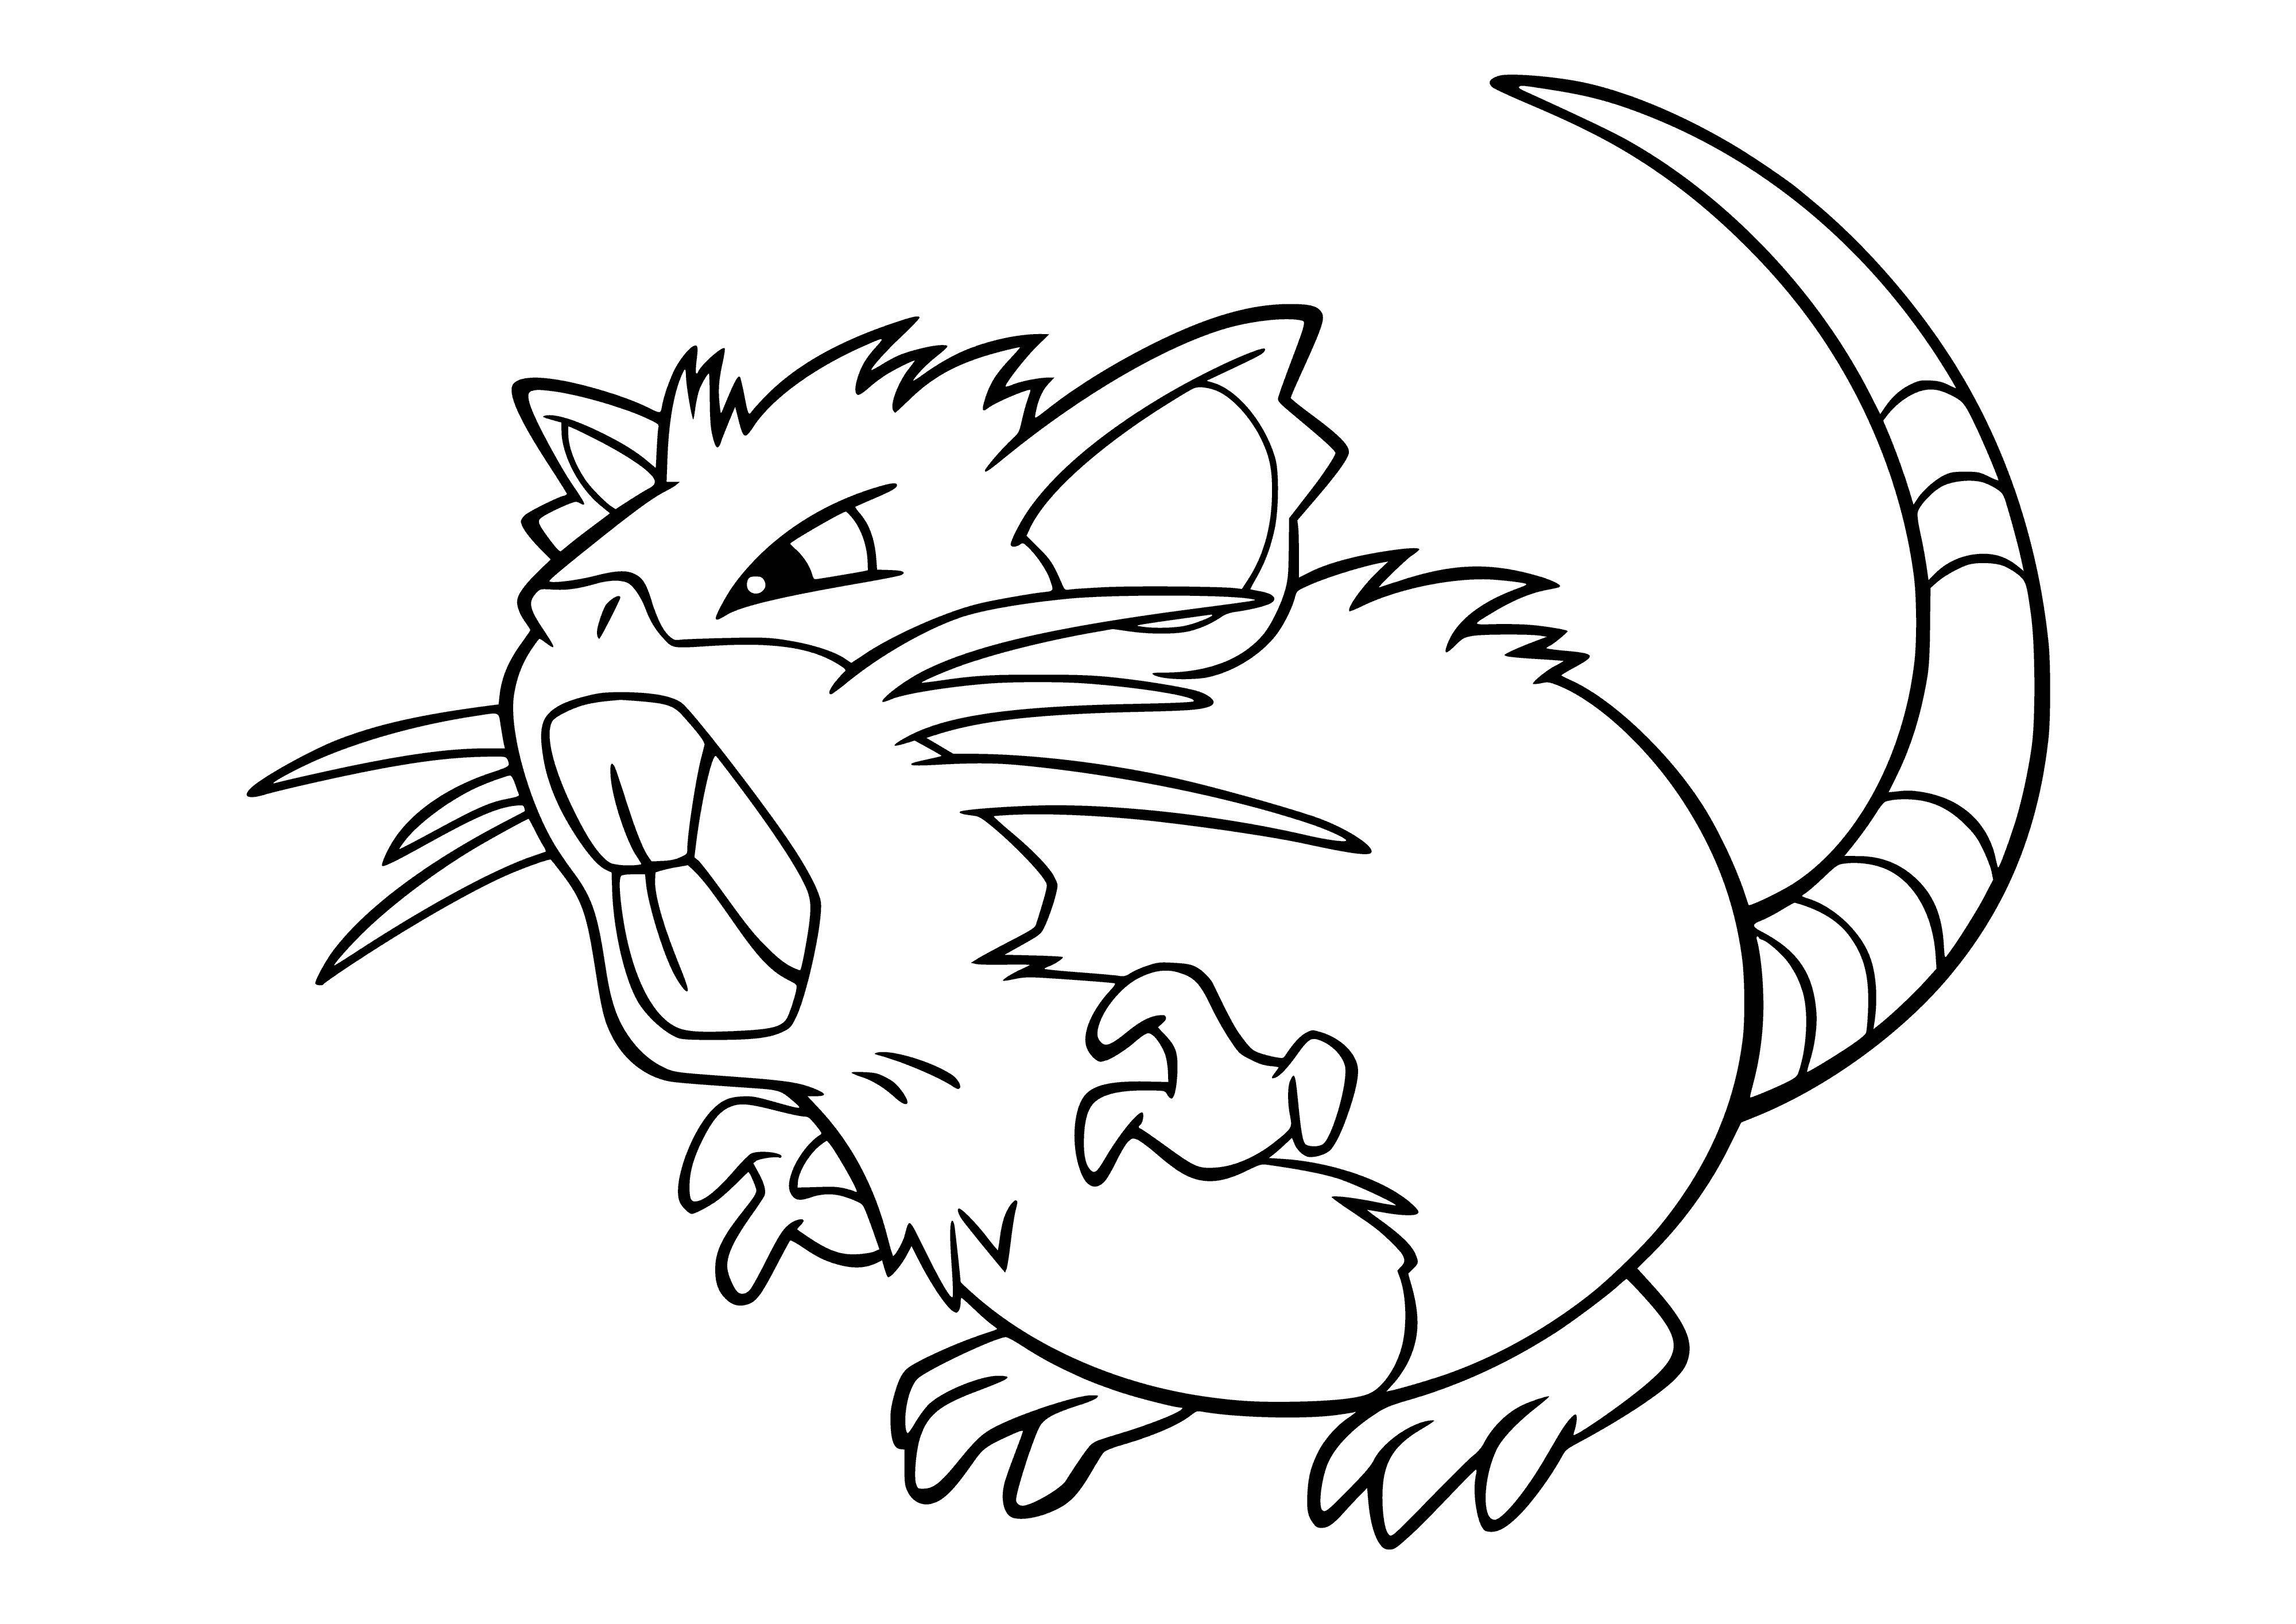 coloring page: Raticate is a gray rodent w/ large front teeth, small brown back & tail, black eyes & pink nose, four legs w/ three toes each.